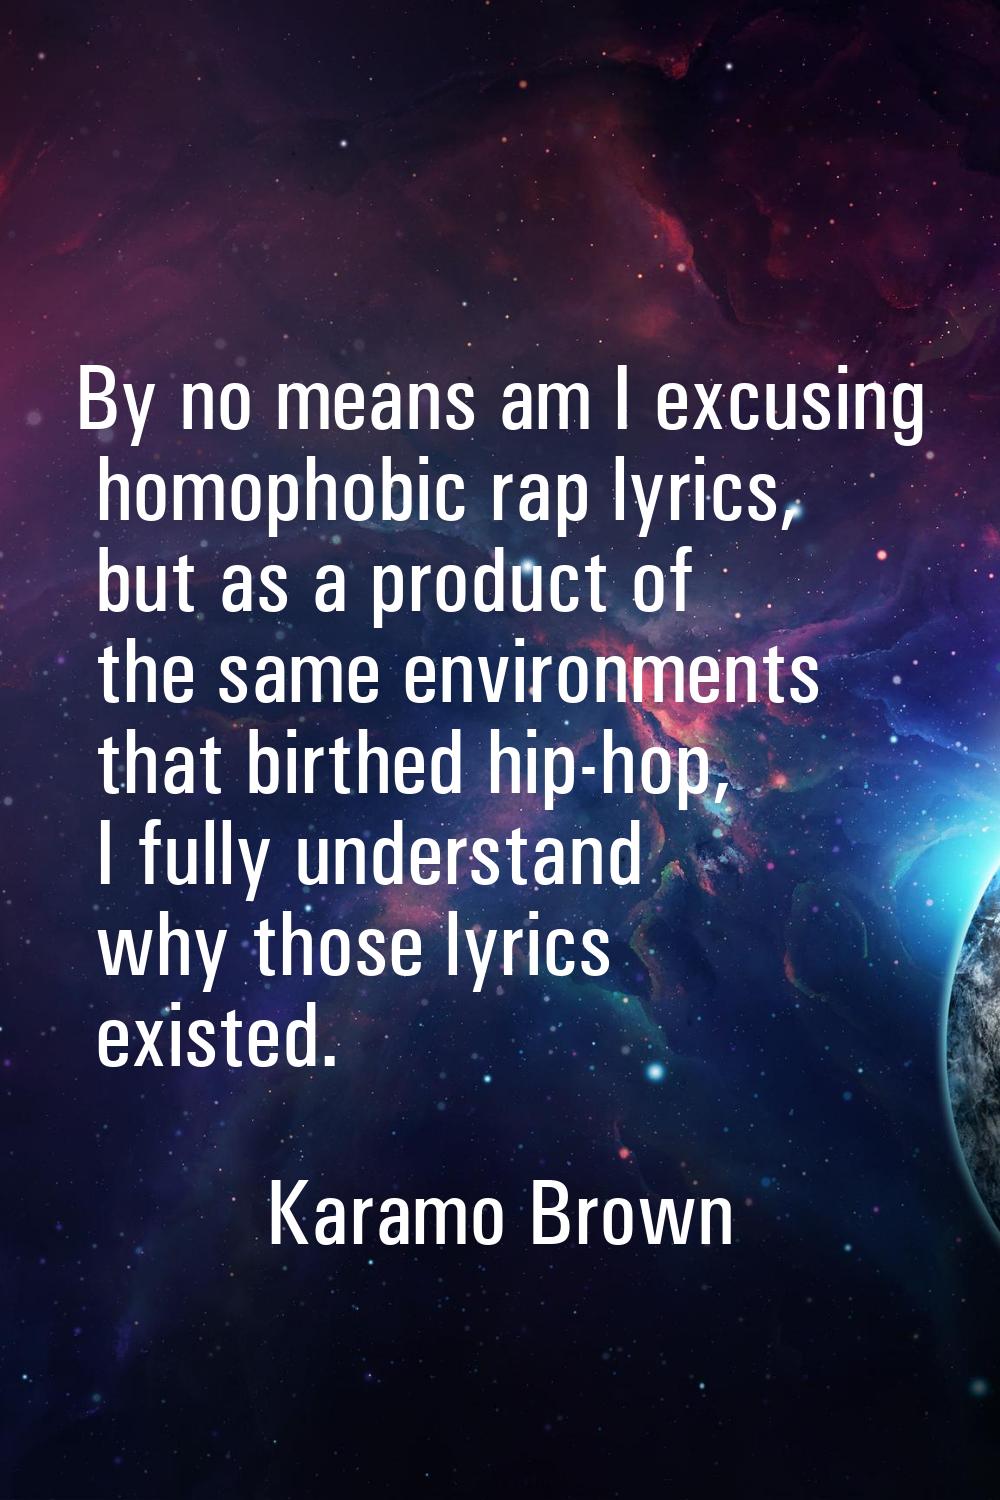 By no means am I excusing homophobic rap lyrics, but as a product of the same environments that bir